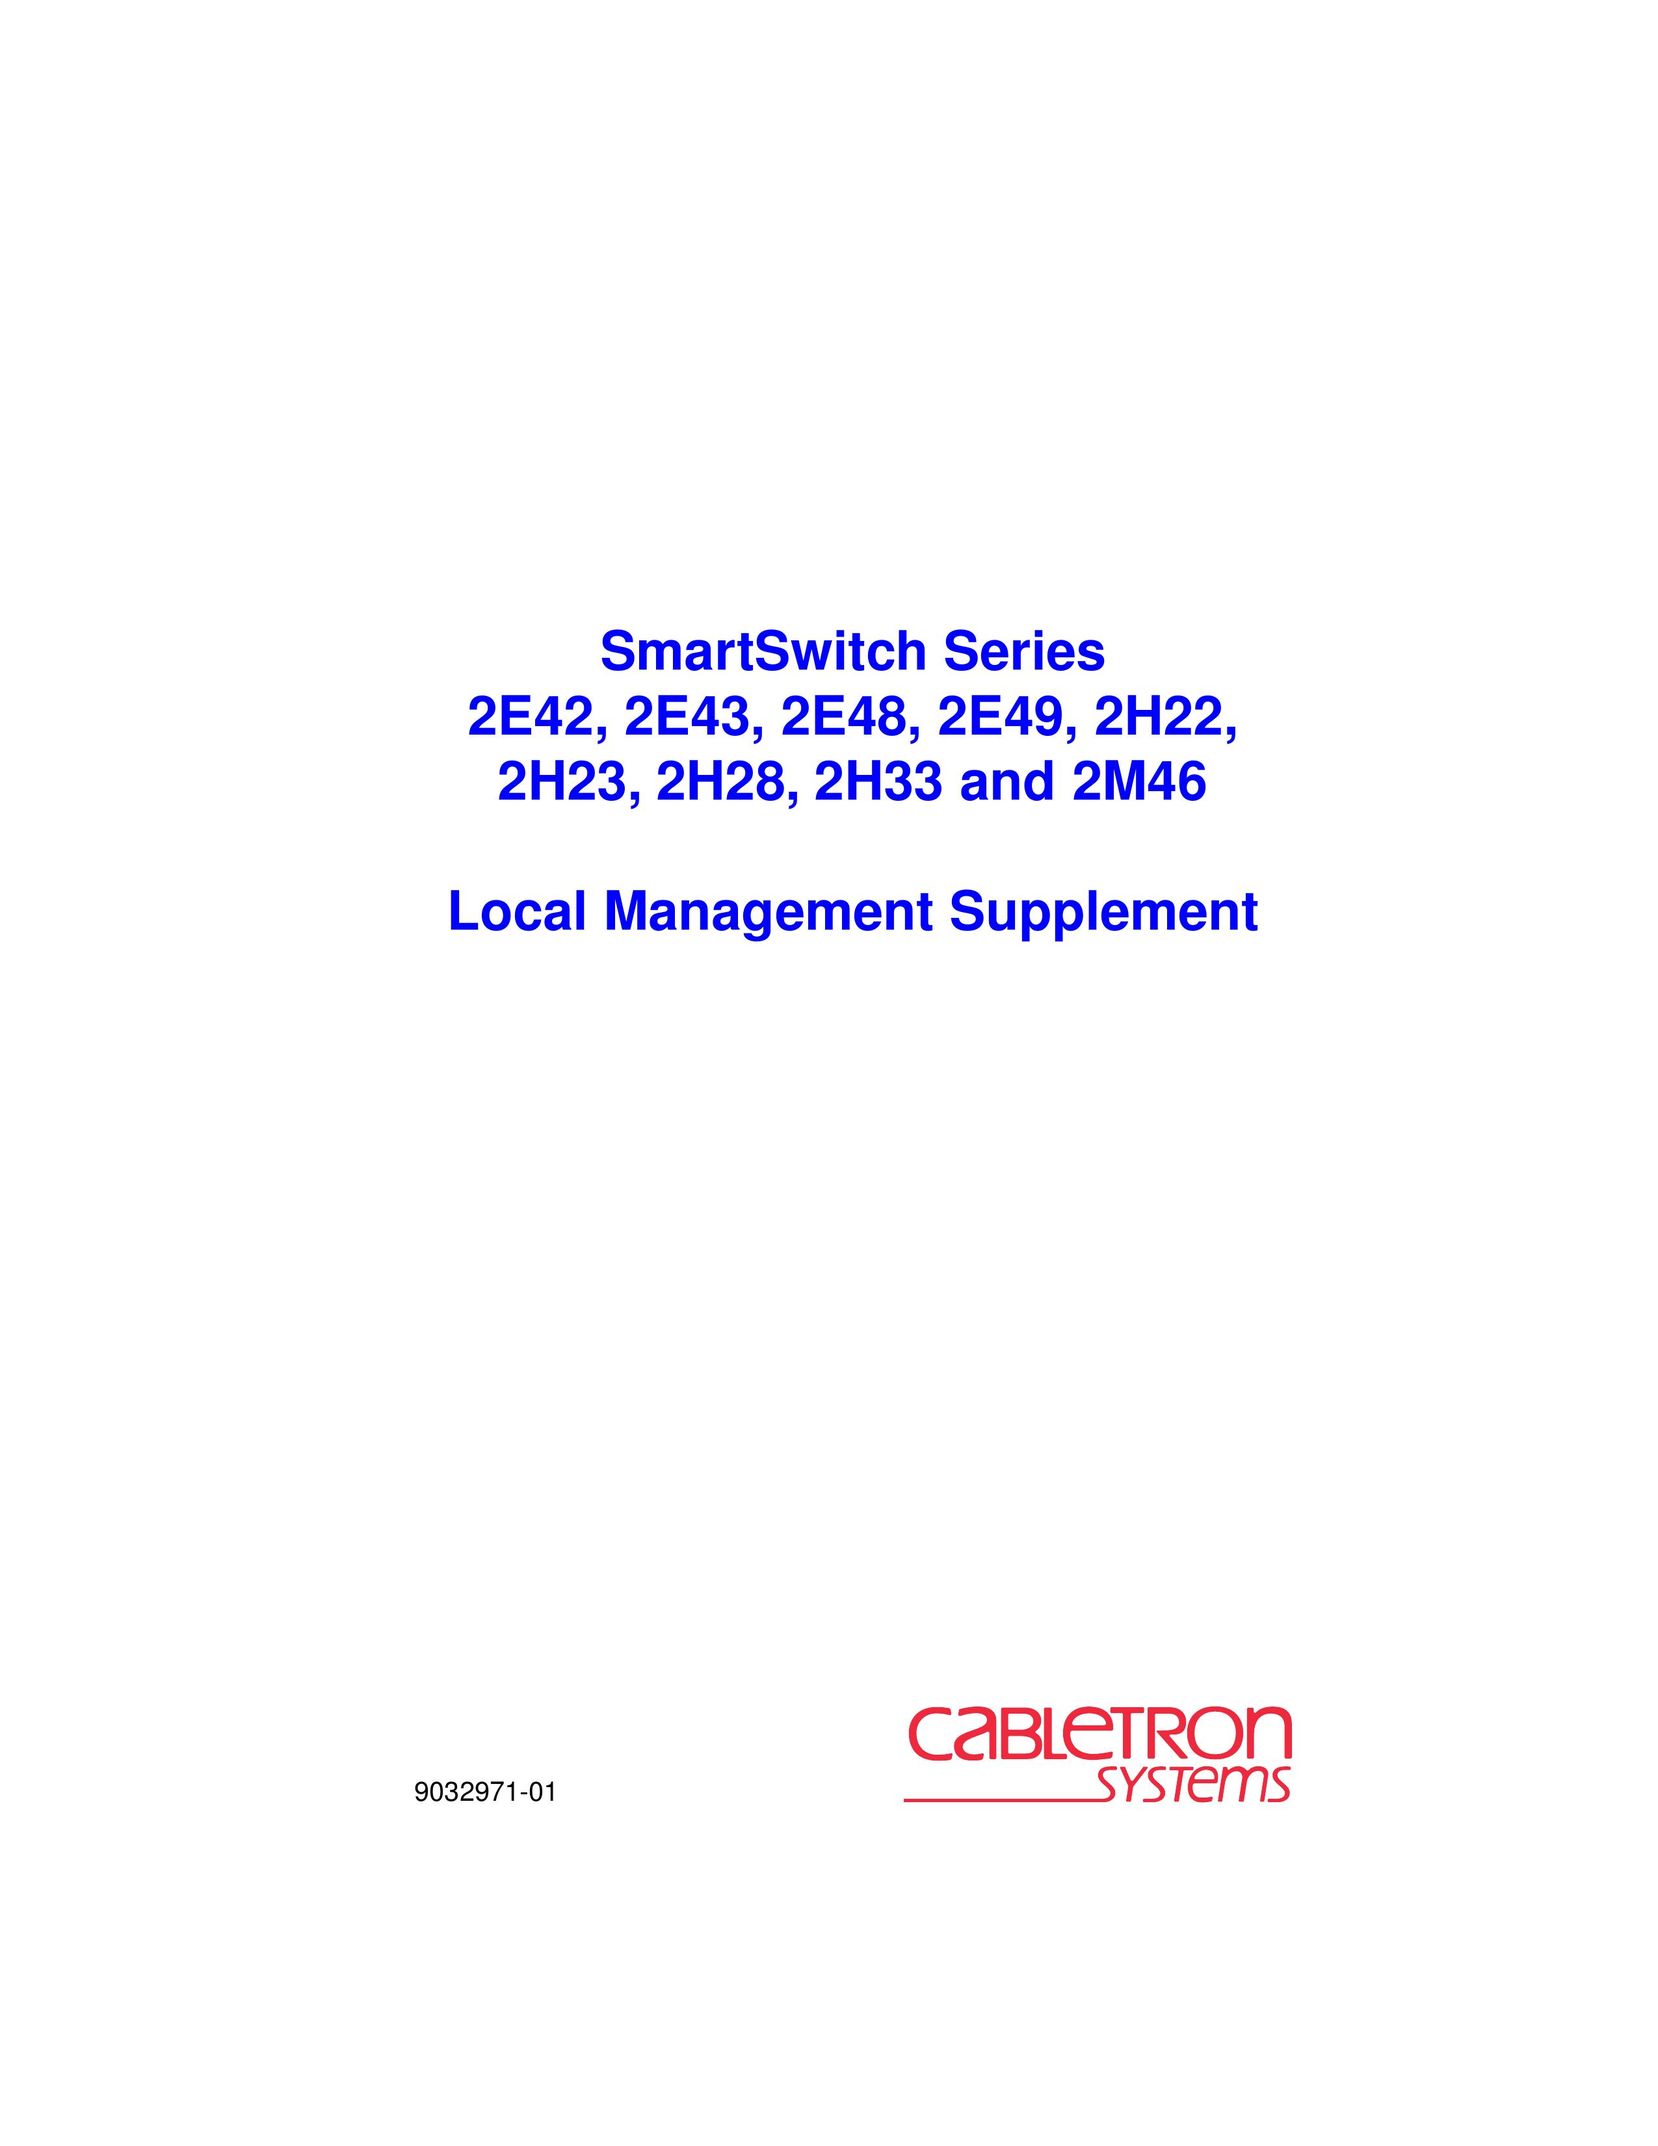 Cabletron Systems 2H22 Switch User Manual